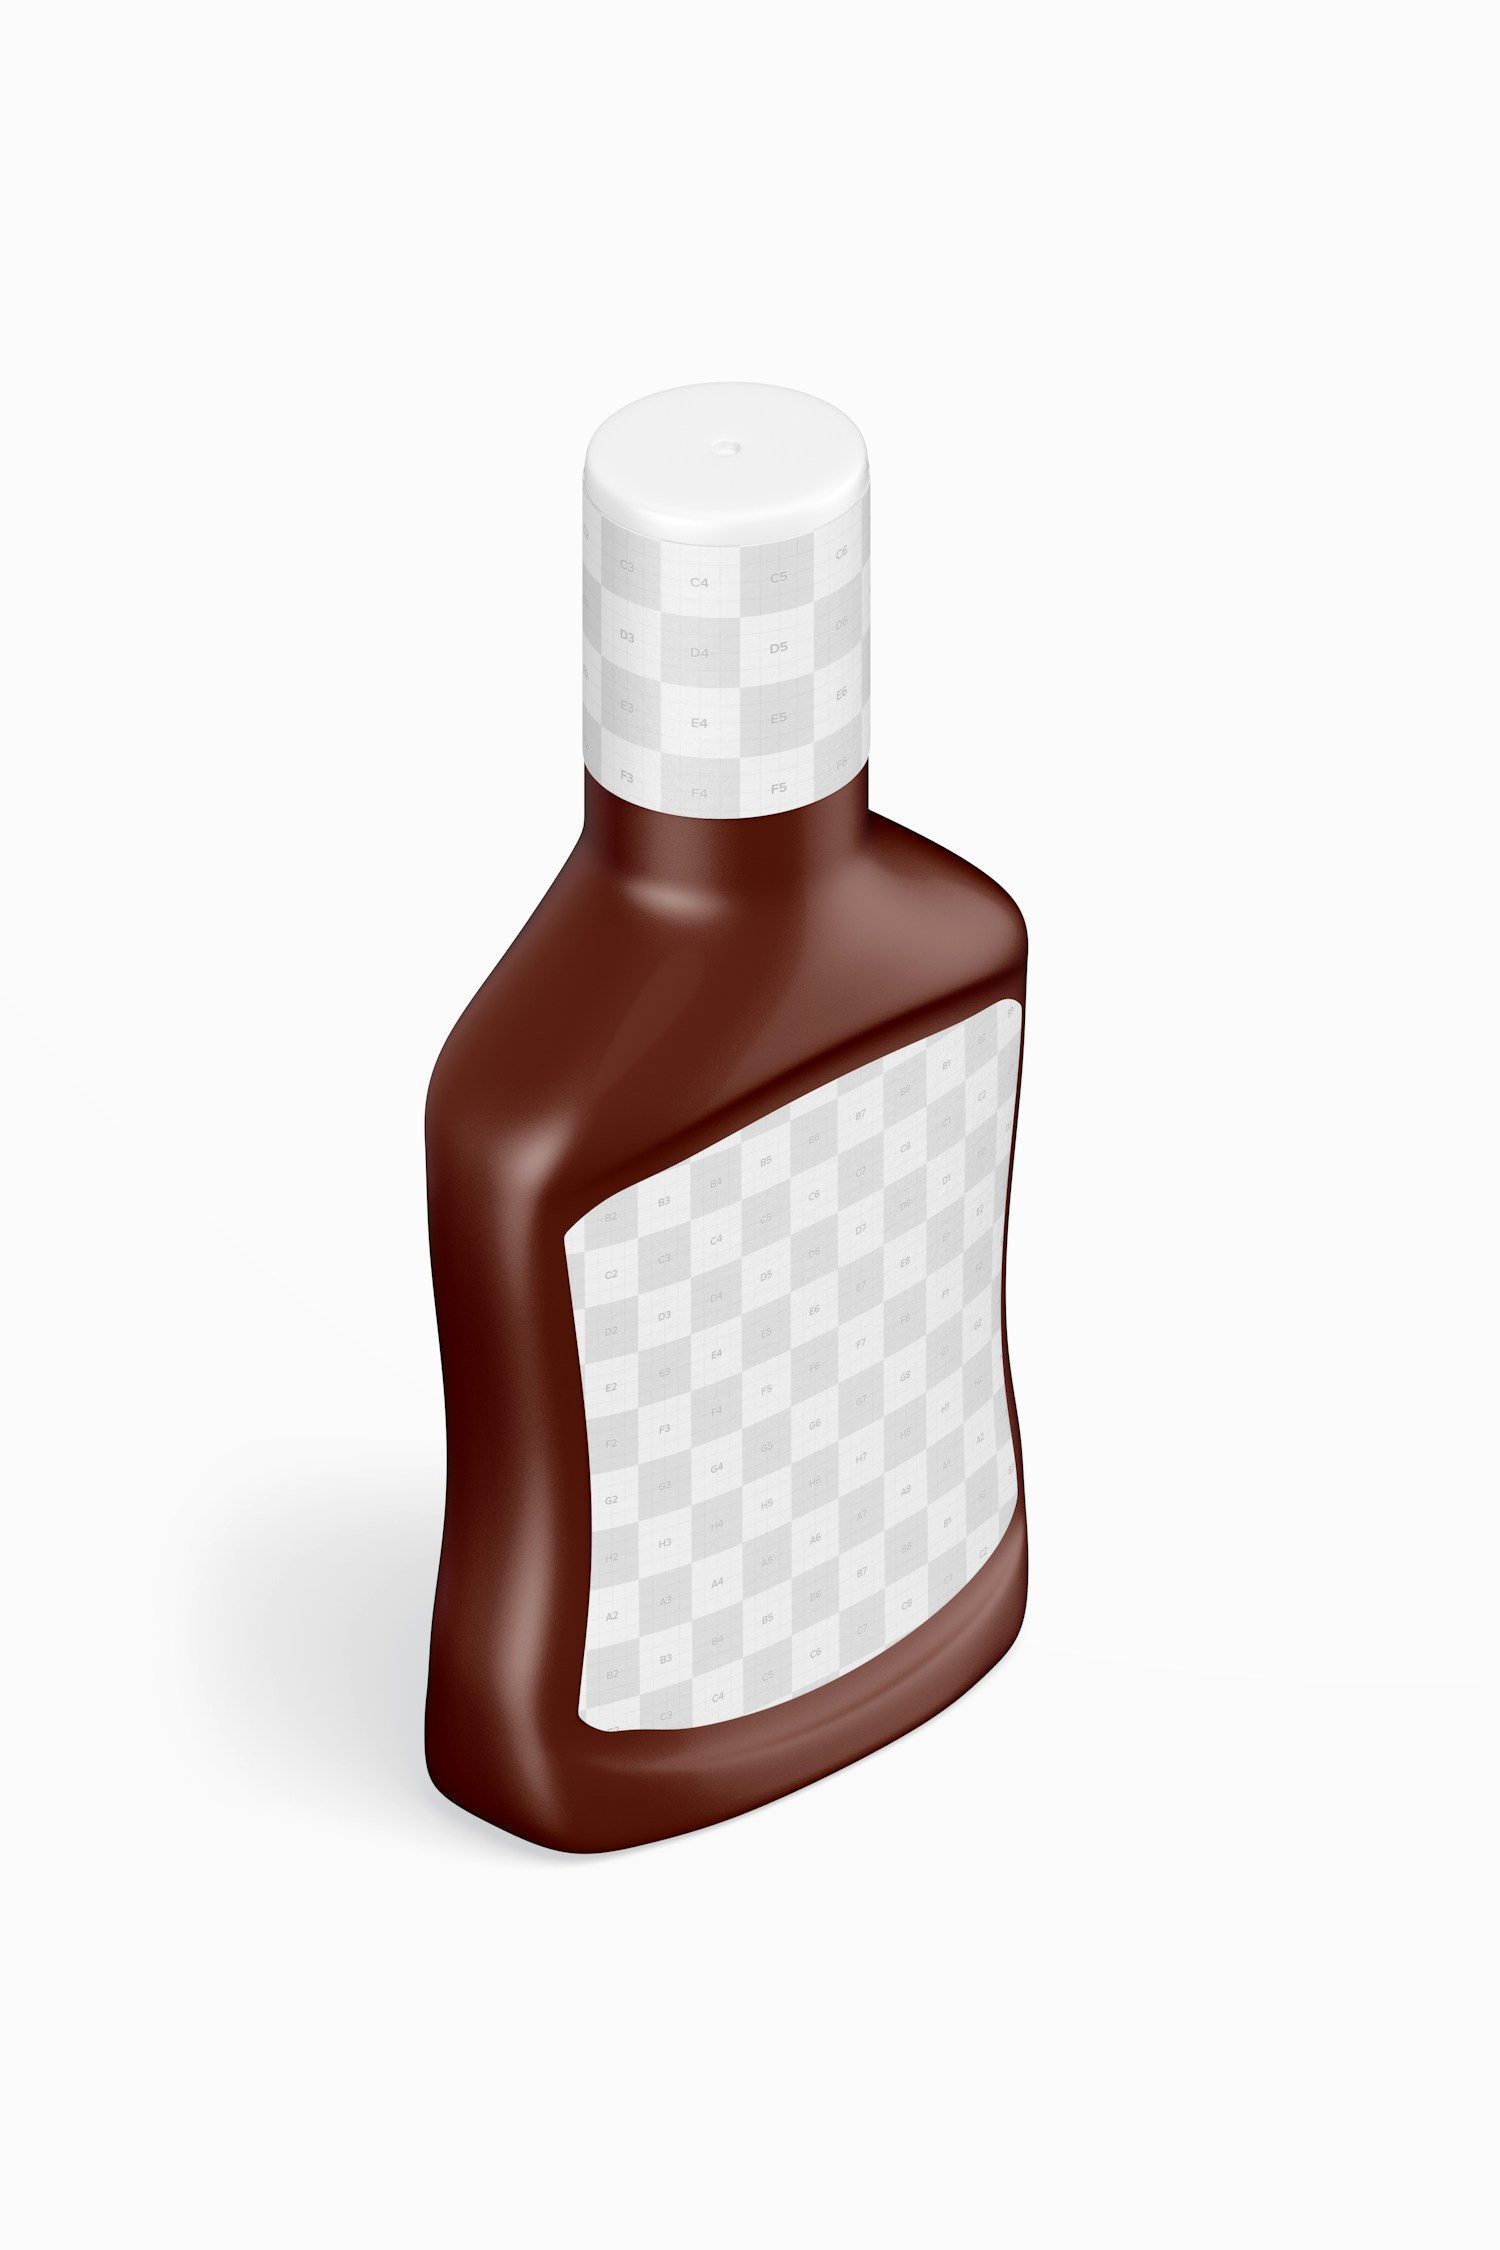 Barbecue Sauce Bottle Mockup, Isometric Right View